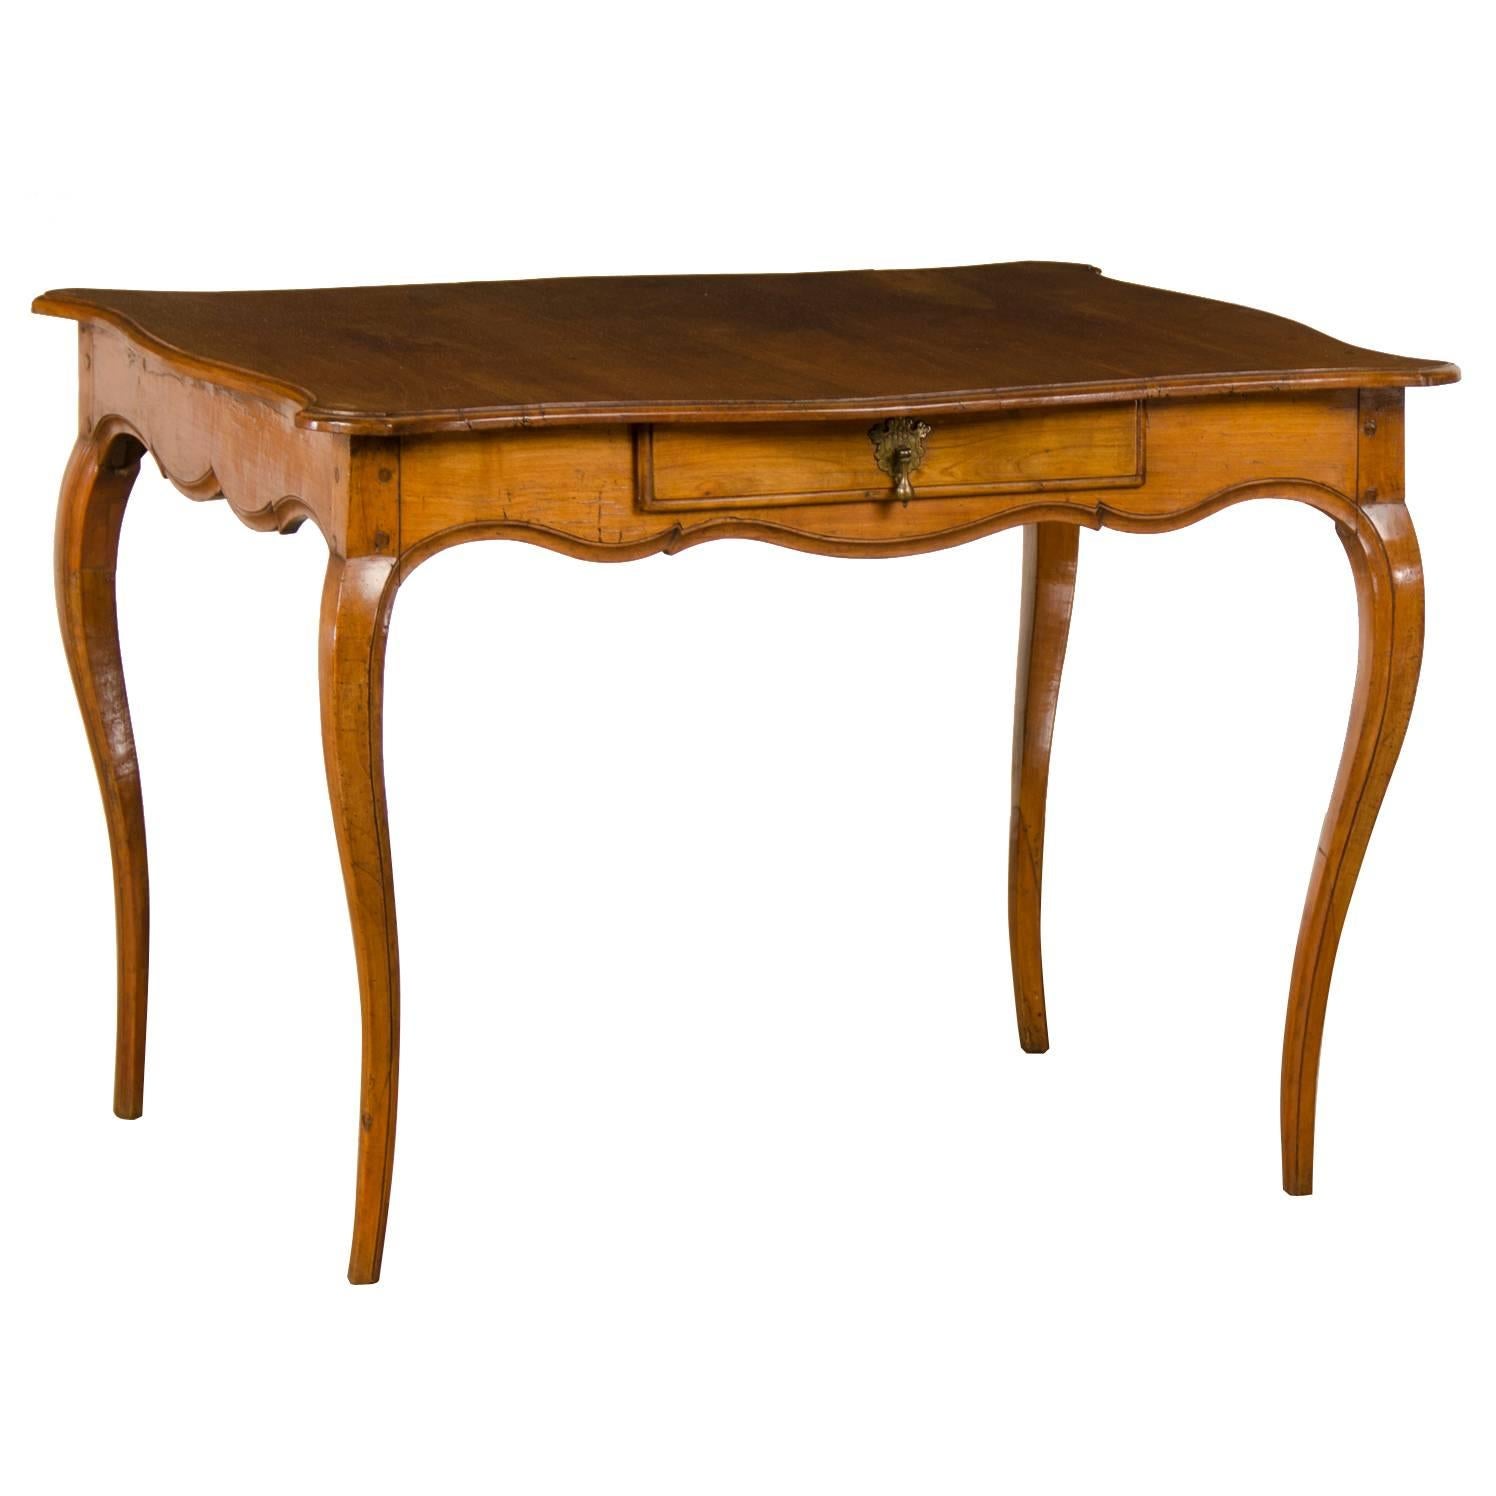 Antique French Louis XV Period Cherrywood Table, circa 1760 For Sale